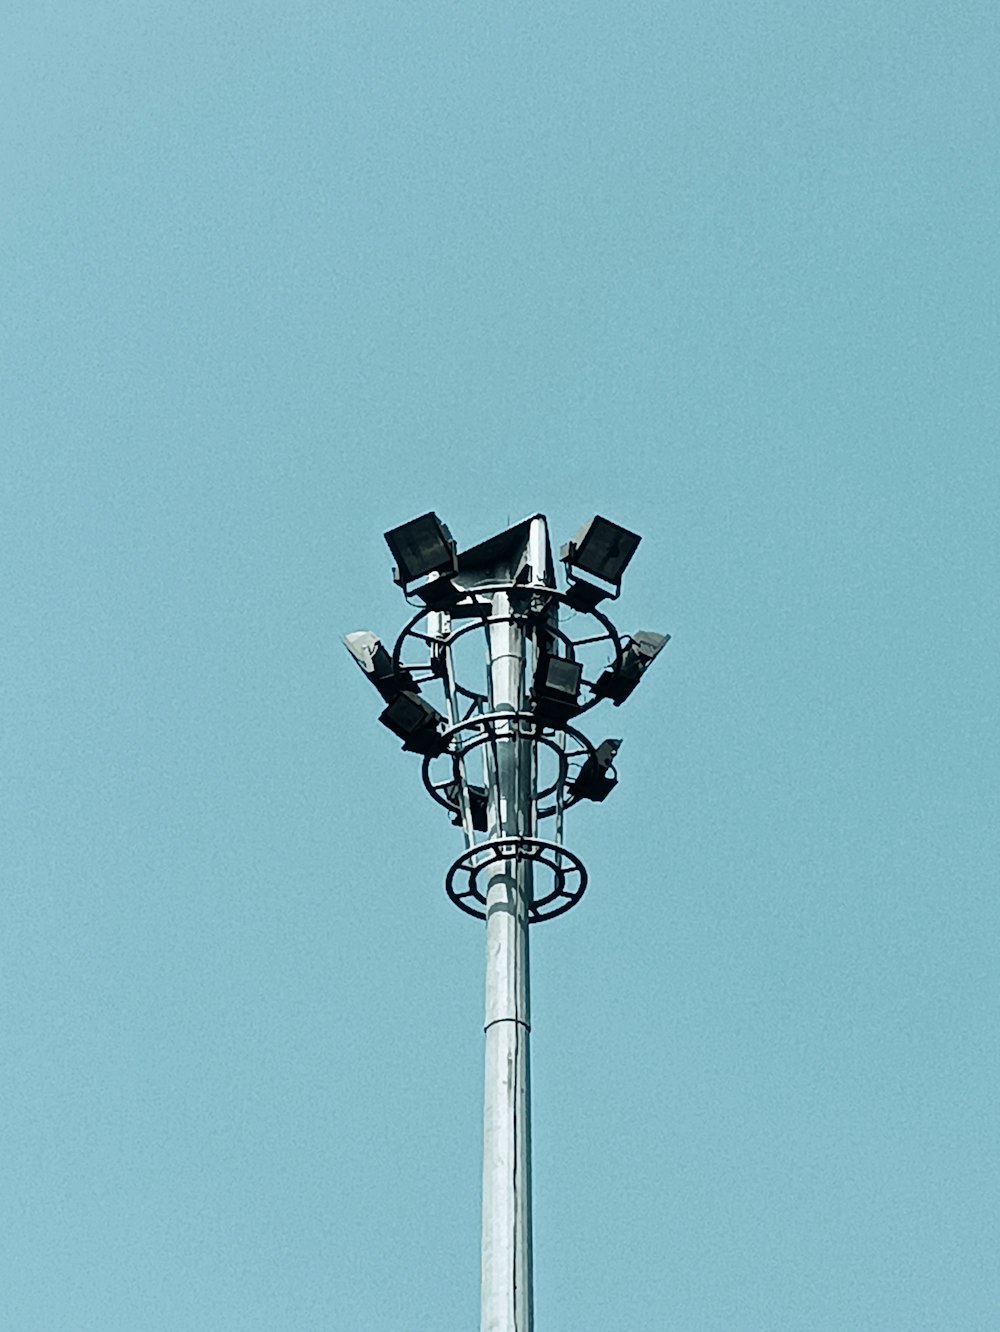 a tall metal pole with a bunch of lights on top of it